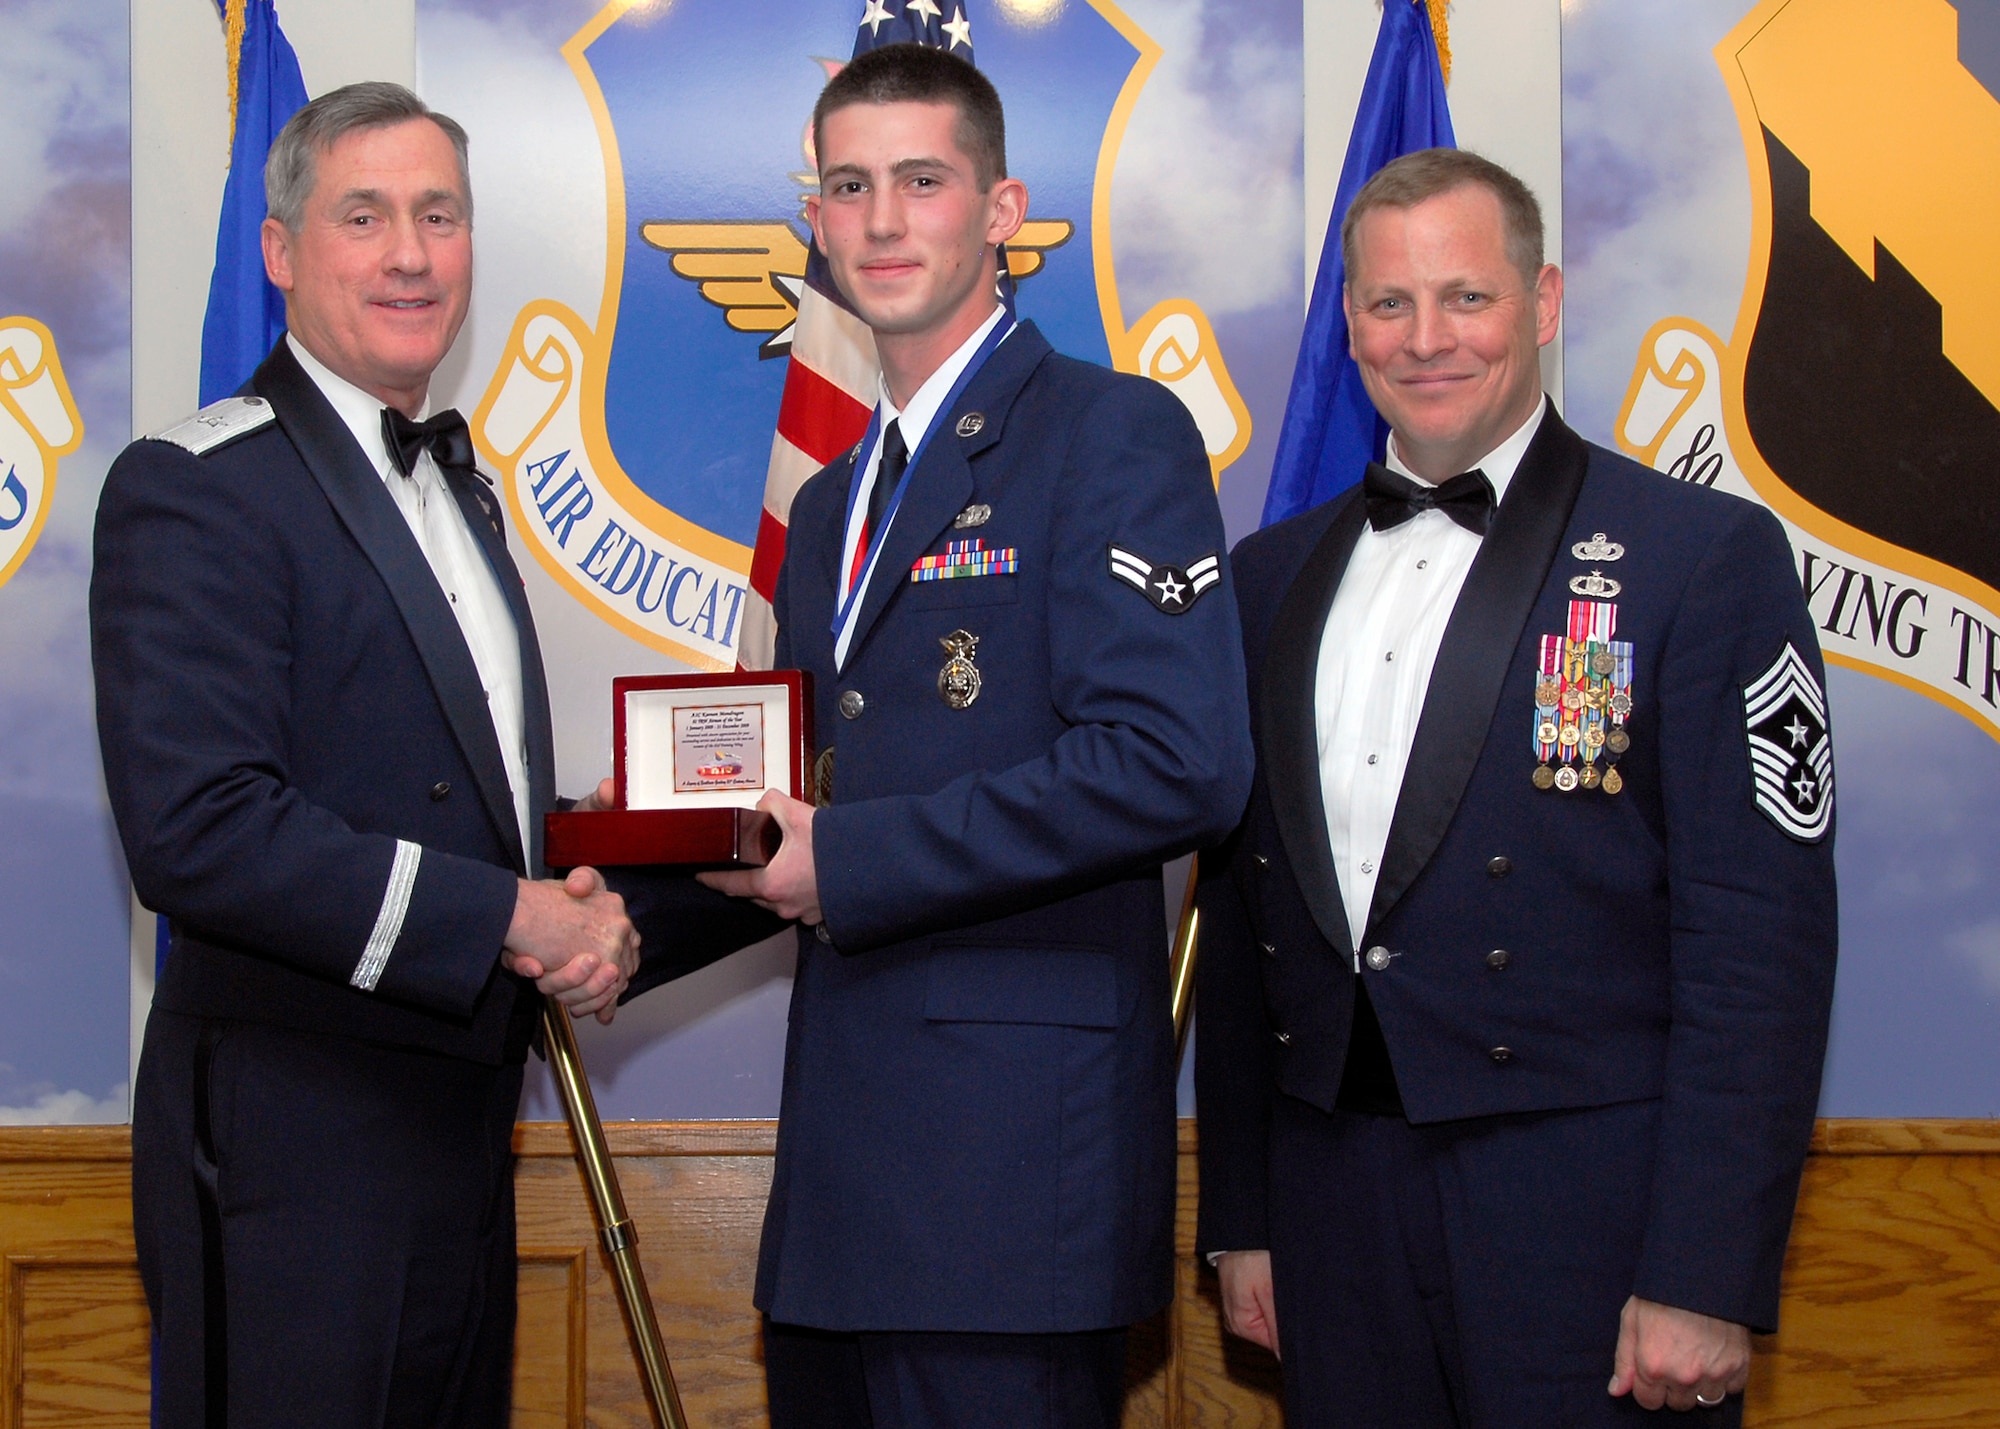 Brig. Gen. O.G. Mannon, 82nd Training Wing commander, presents Airman 1st Class Keenan Mondragon, 82nd Security Forces Squadron, with the Airman of the Year award March 5 during the 2009 82nd TRW Annual Awards banquet. Also pictured is wing Command Chief, Chief Master Sgt. Kenneth Sallinger. (U.S. Air Force photo/Harry Tonemah) 